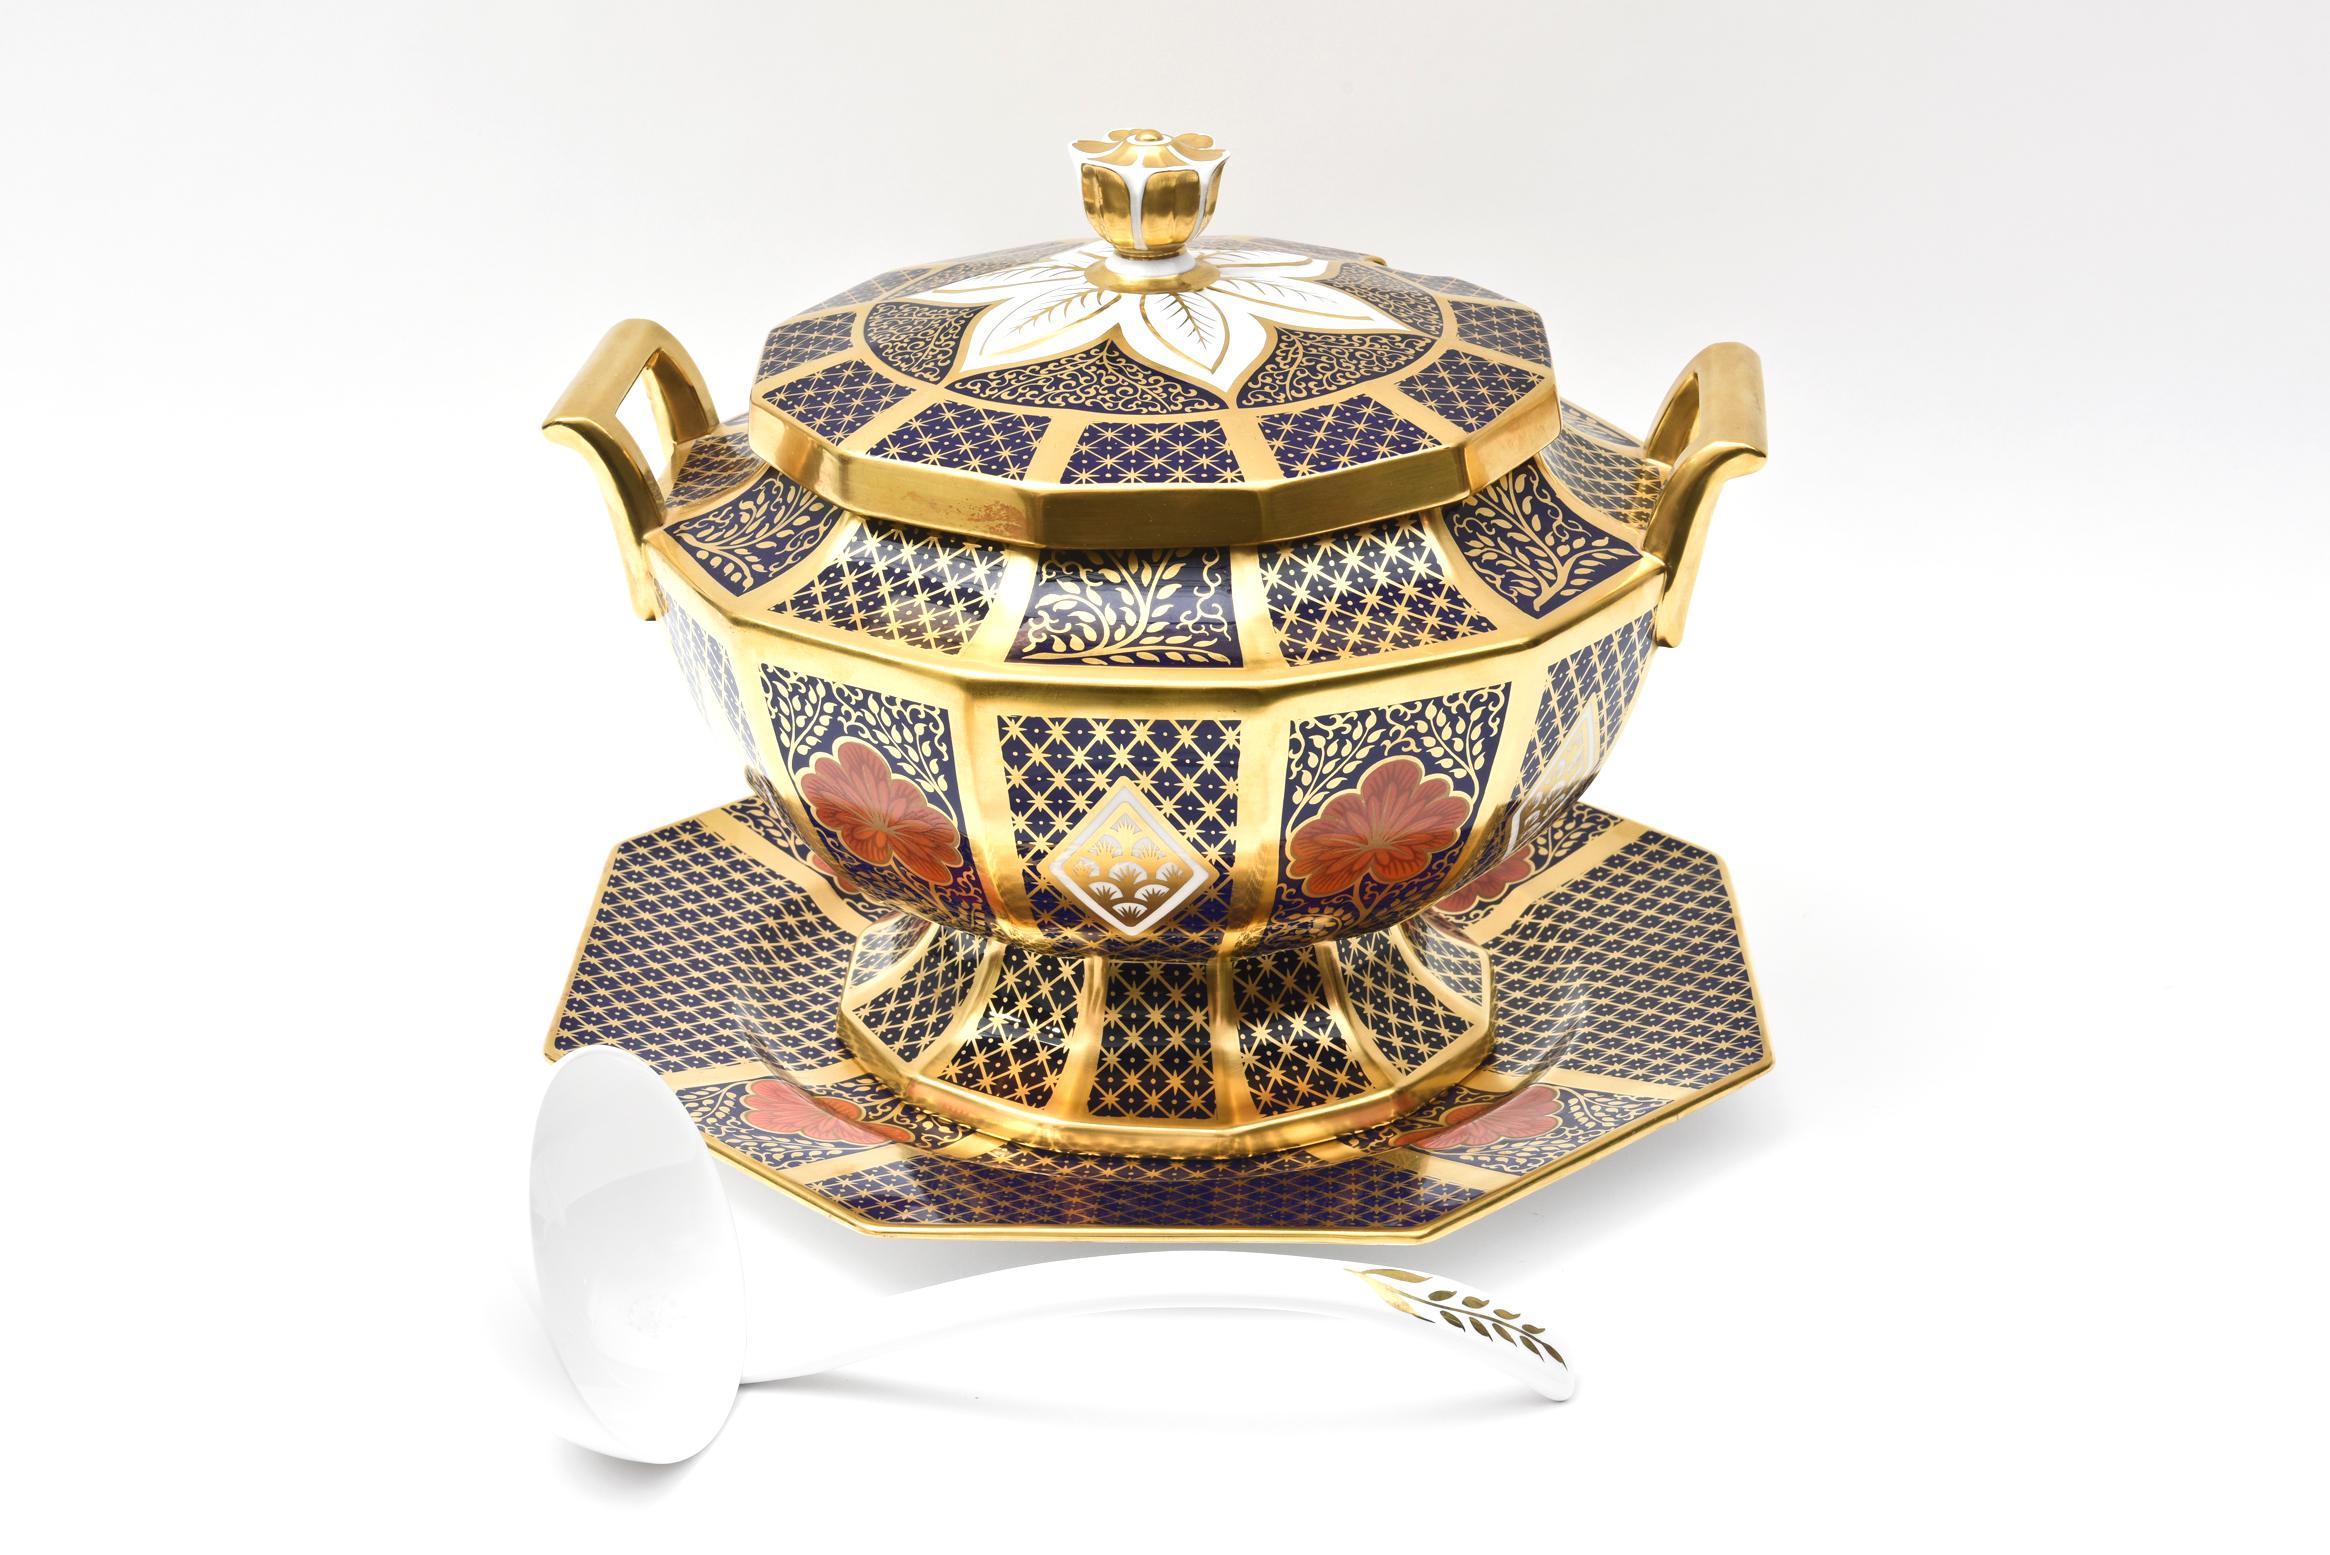 Hand-Crafted English Porcelain Imari Pattern Tureen with Underplate, Vibrantly Painted